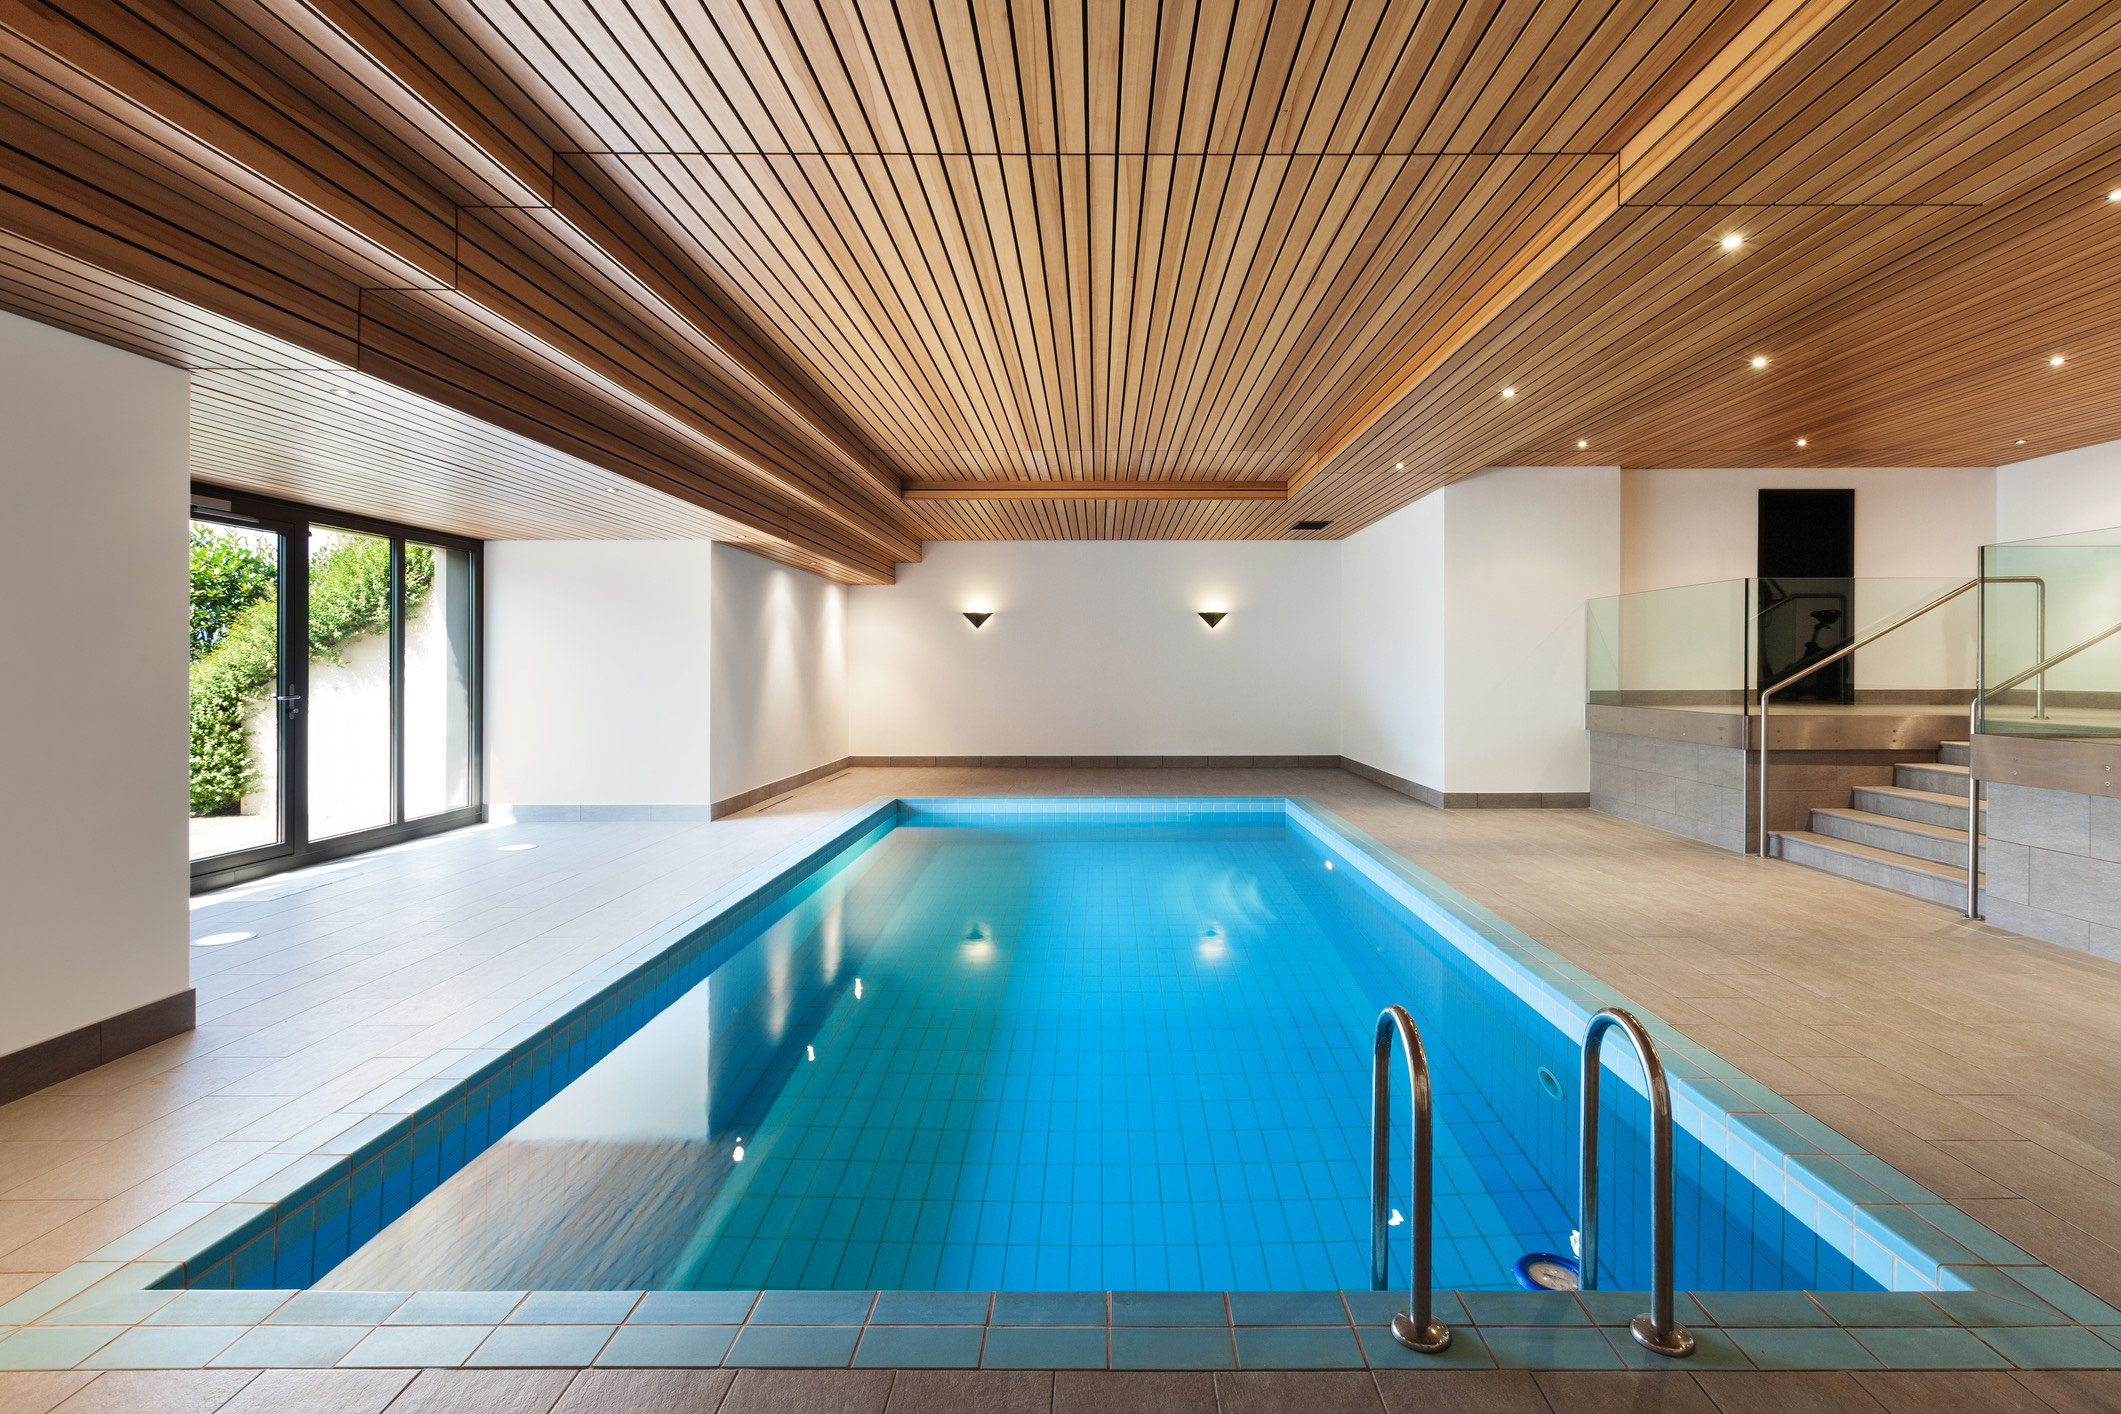 Indoor swimming pool in modern home